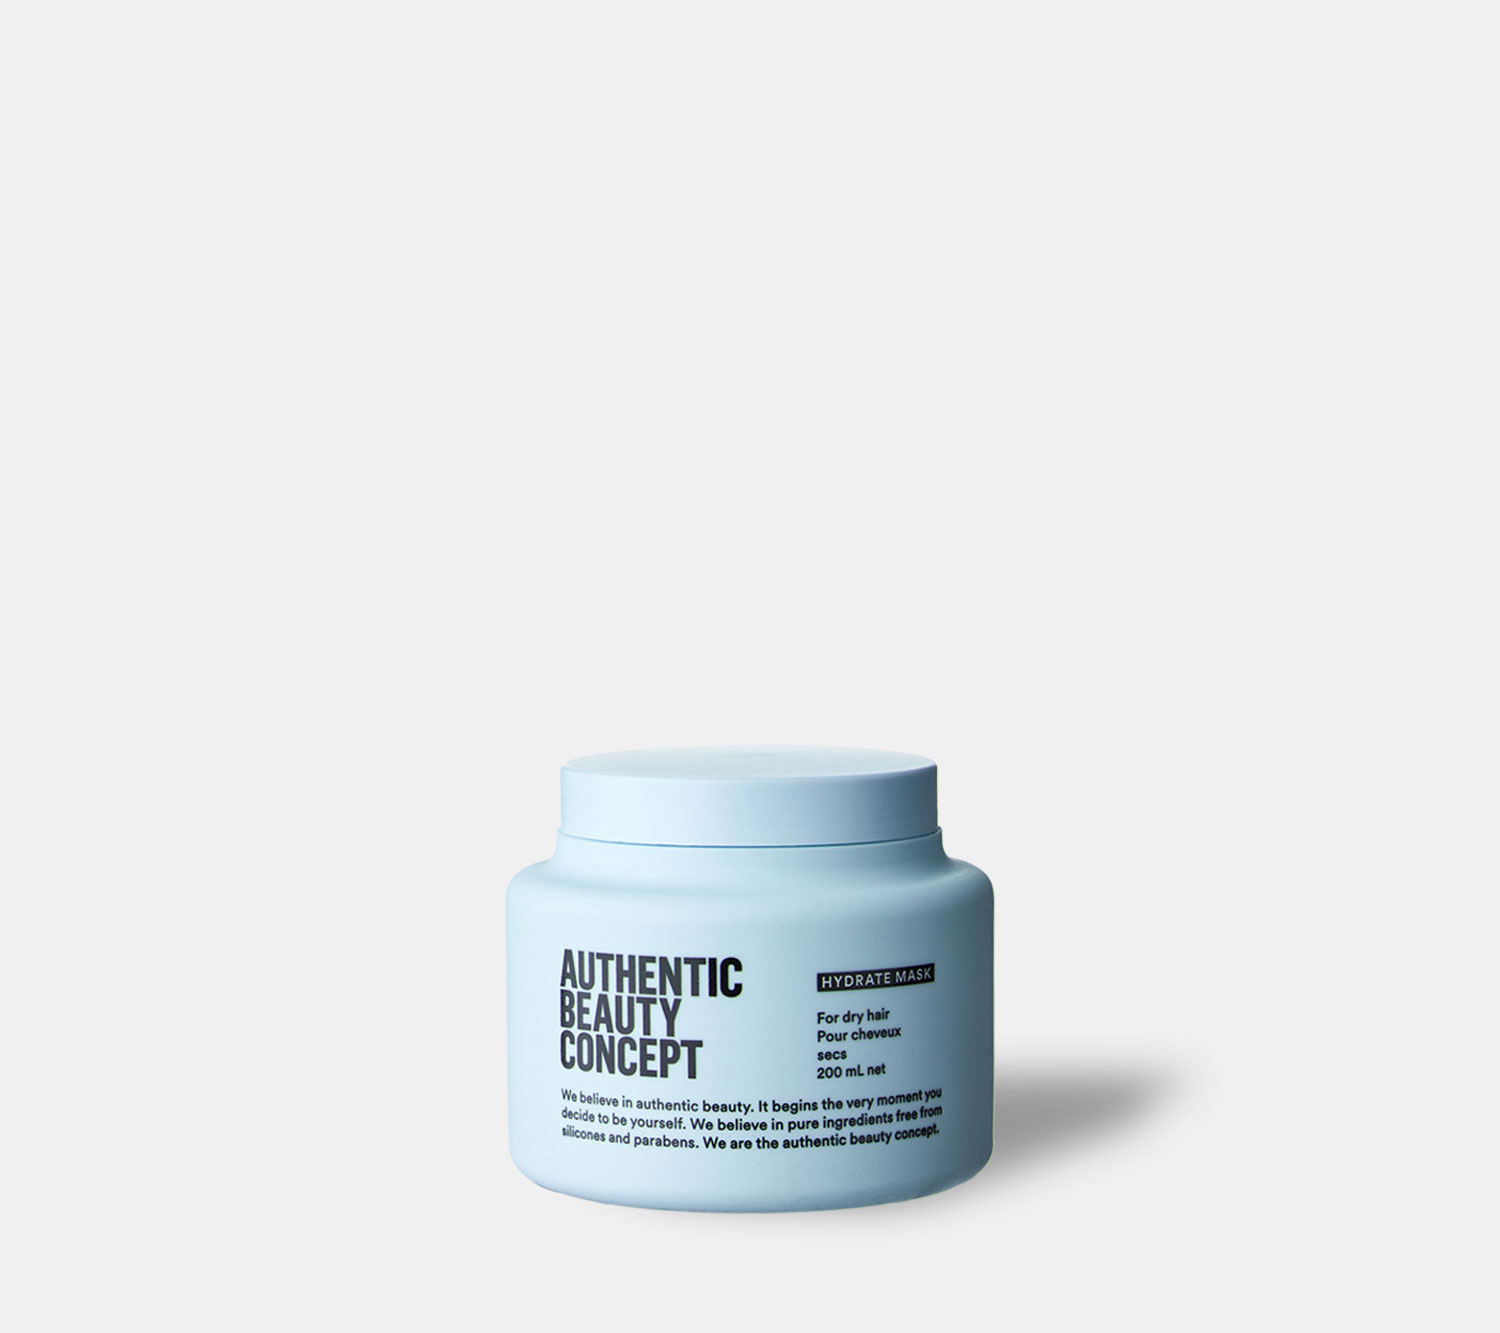 AUTHENTIC BEAUTY CONCEPT HYDRATE MASK